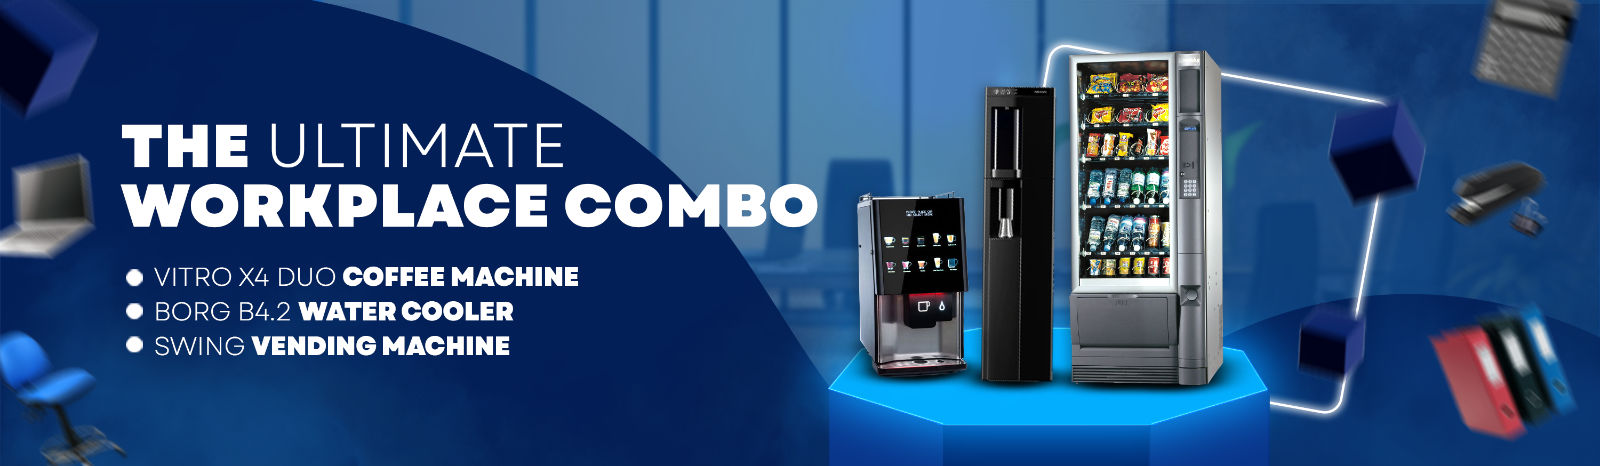 Ultimate Workplace Combo Vending Machines